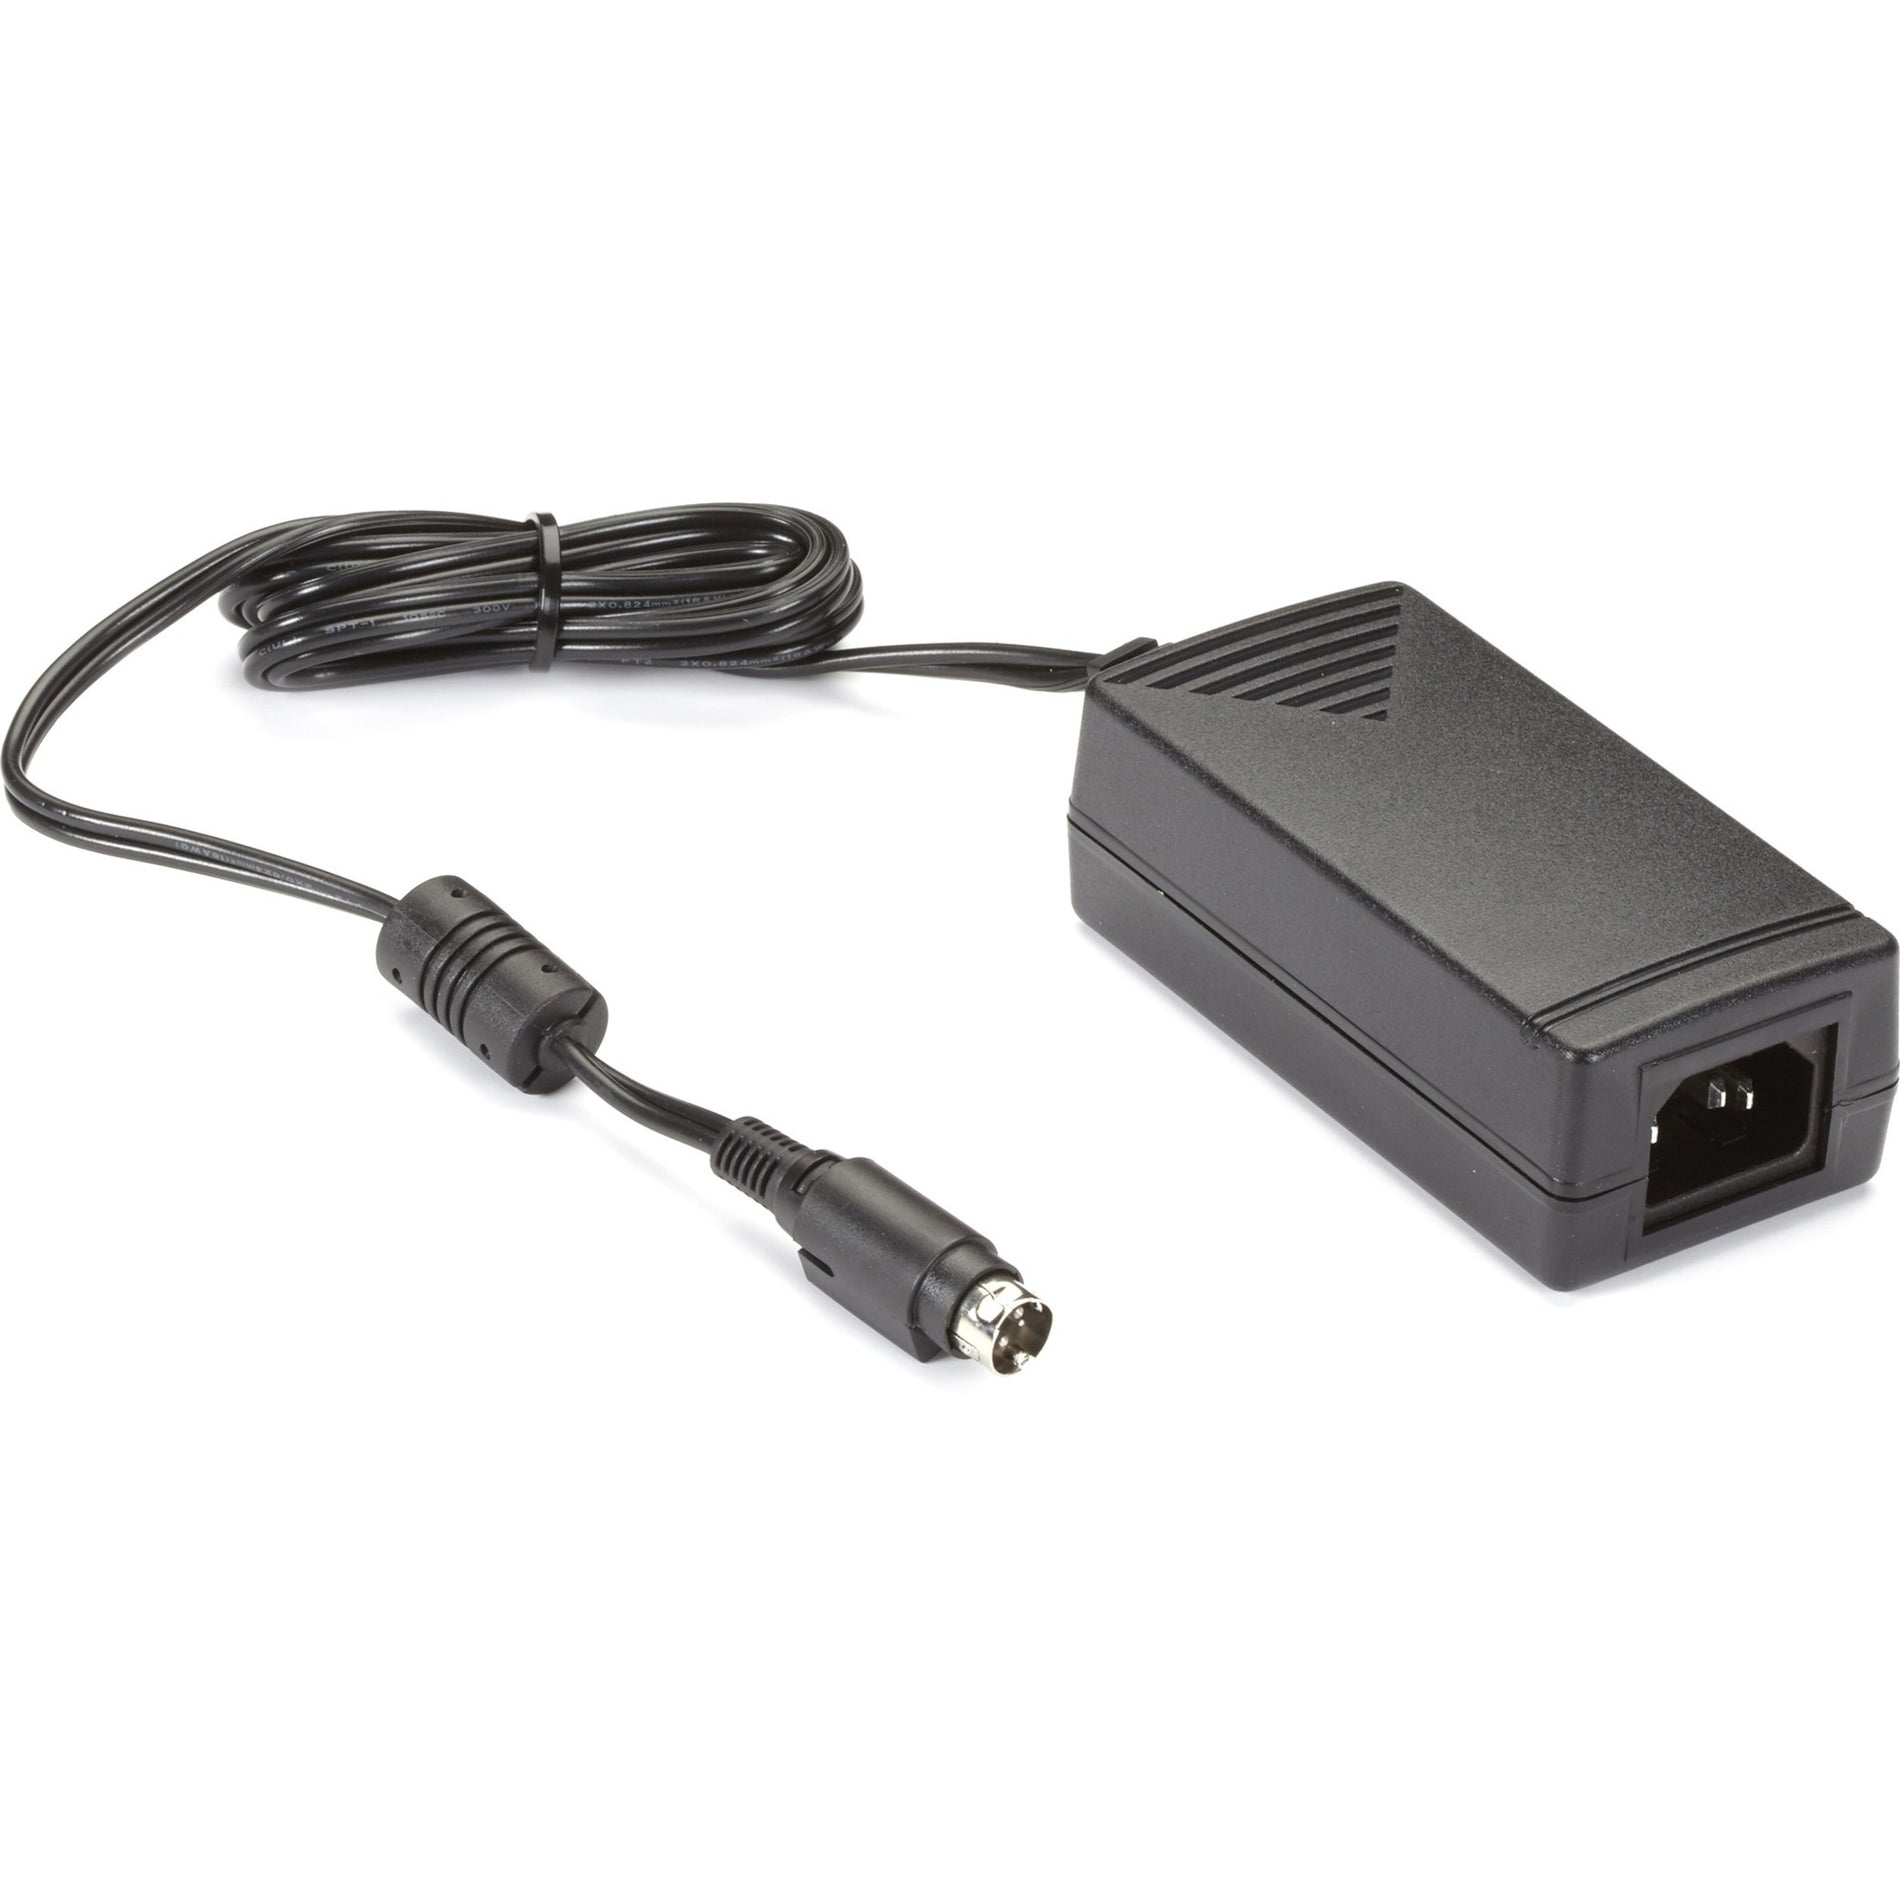 Black Box PS656 Spare Power Supply for KVM Devices - 12VDC, 1.5 Amp, Reliable and Efficient Power Solution